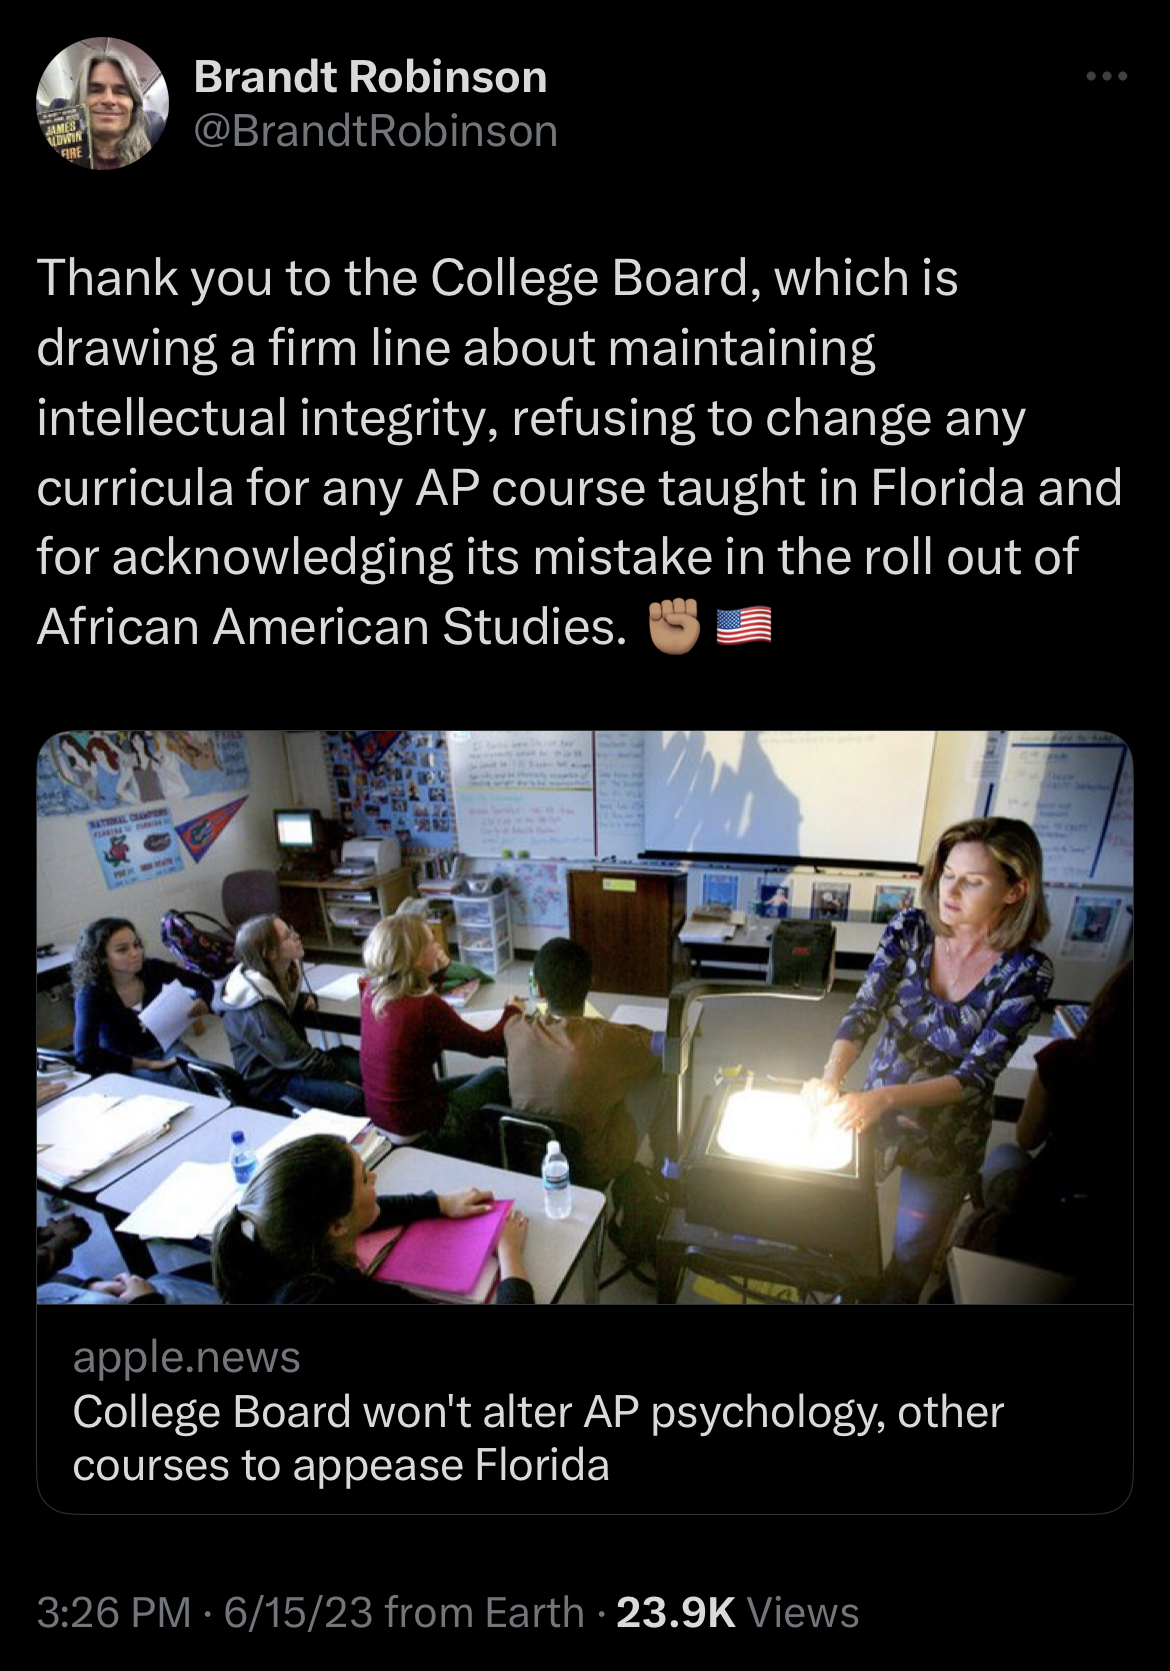 Thank you to the College Board, which is drawing a firm line about maintaining intellectual integrity, refusing to change any curricula for any AP course taught in Florida and for acknowledging its mistake in the roll out of African American Studies.